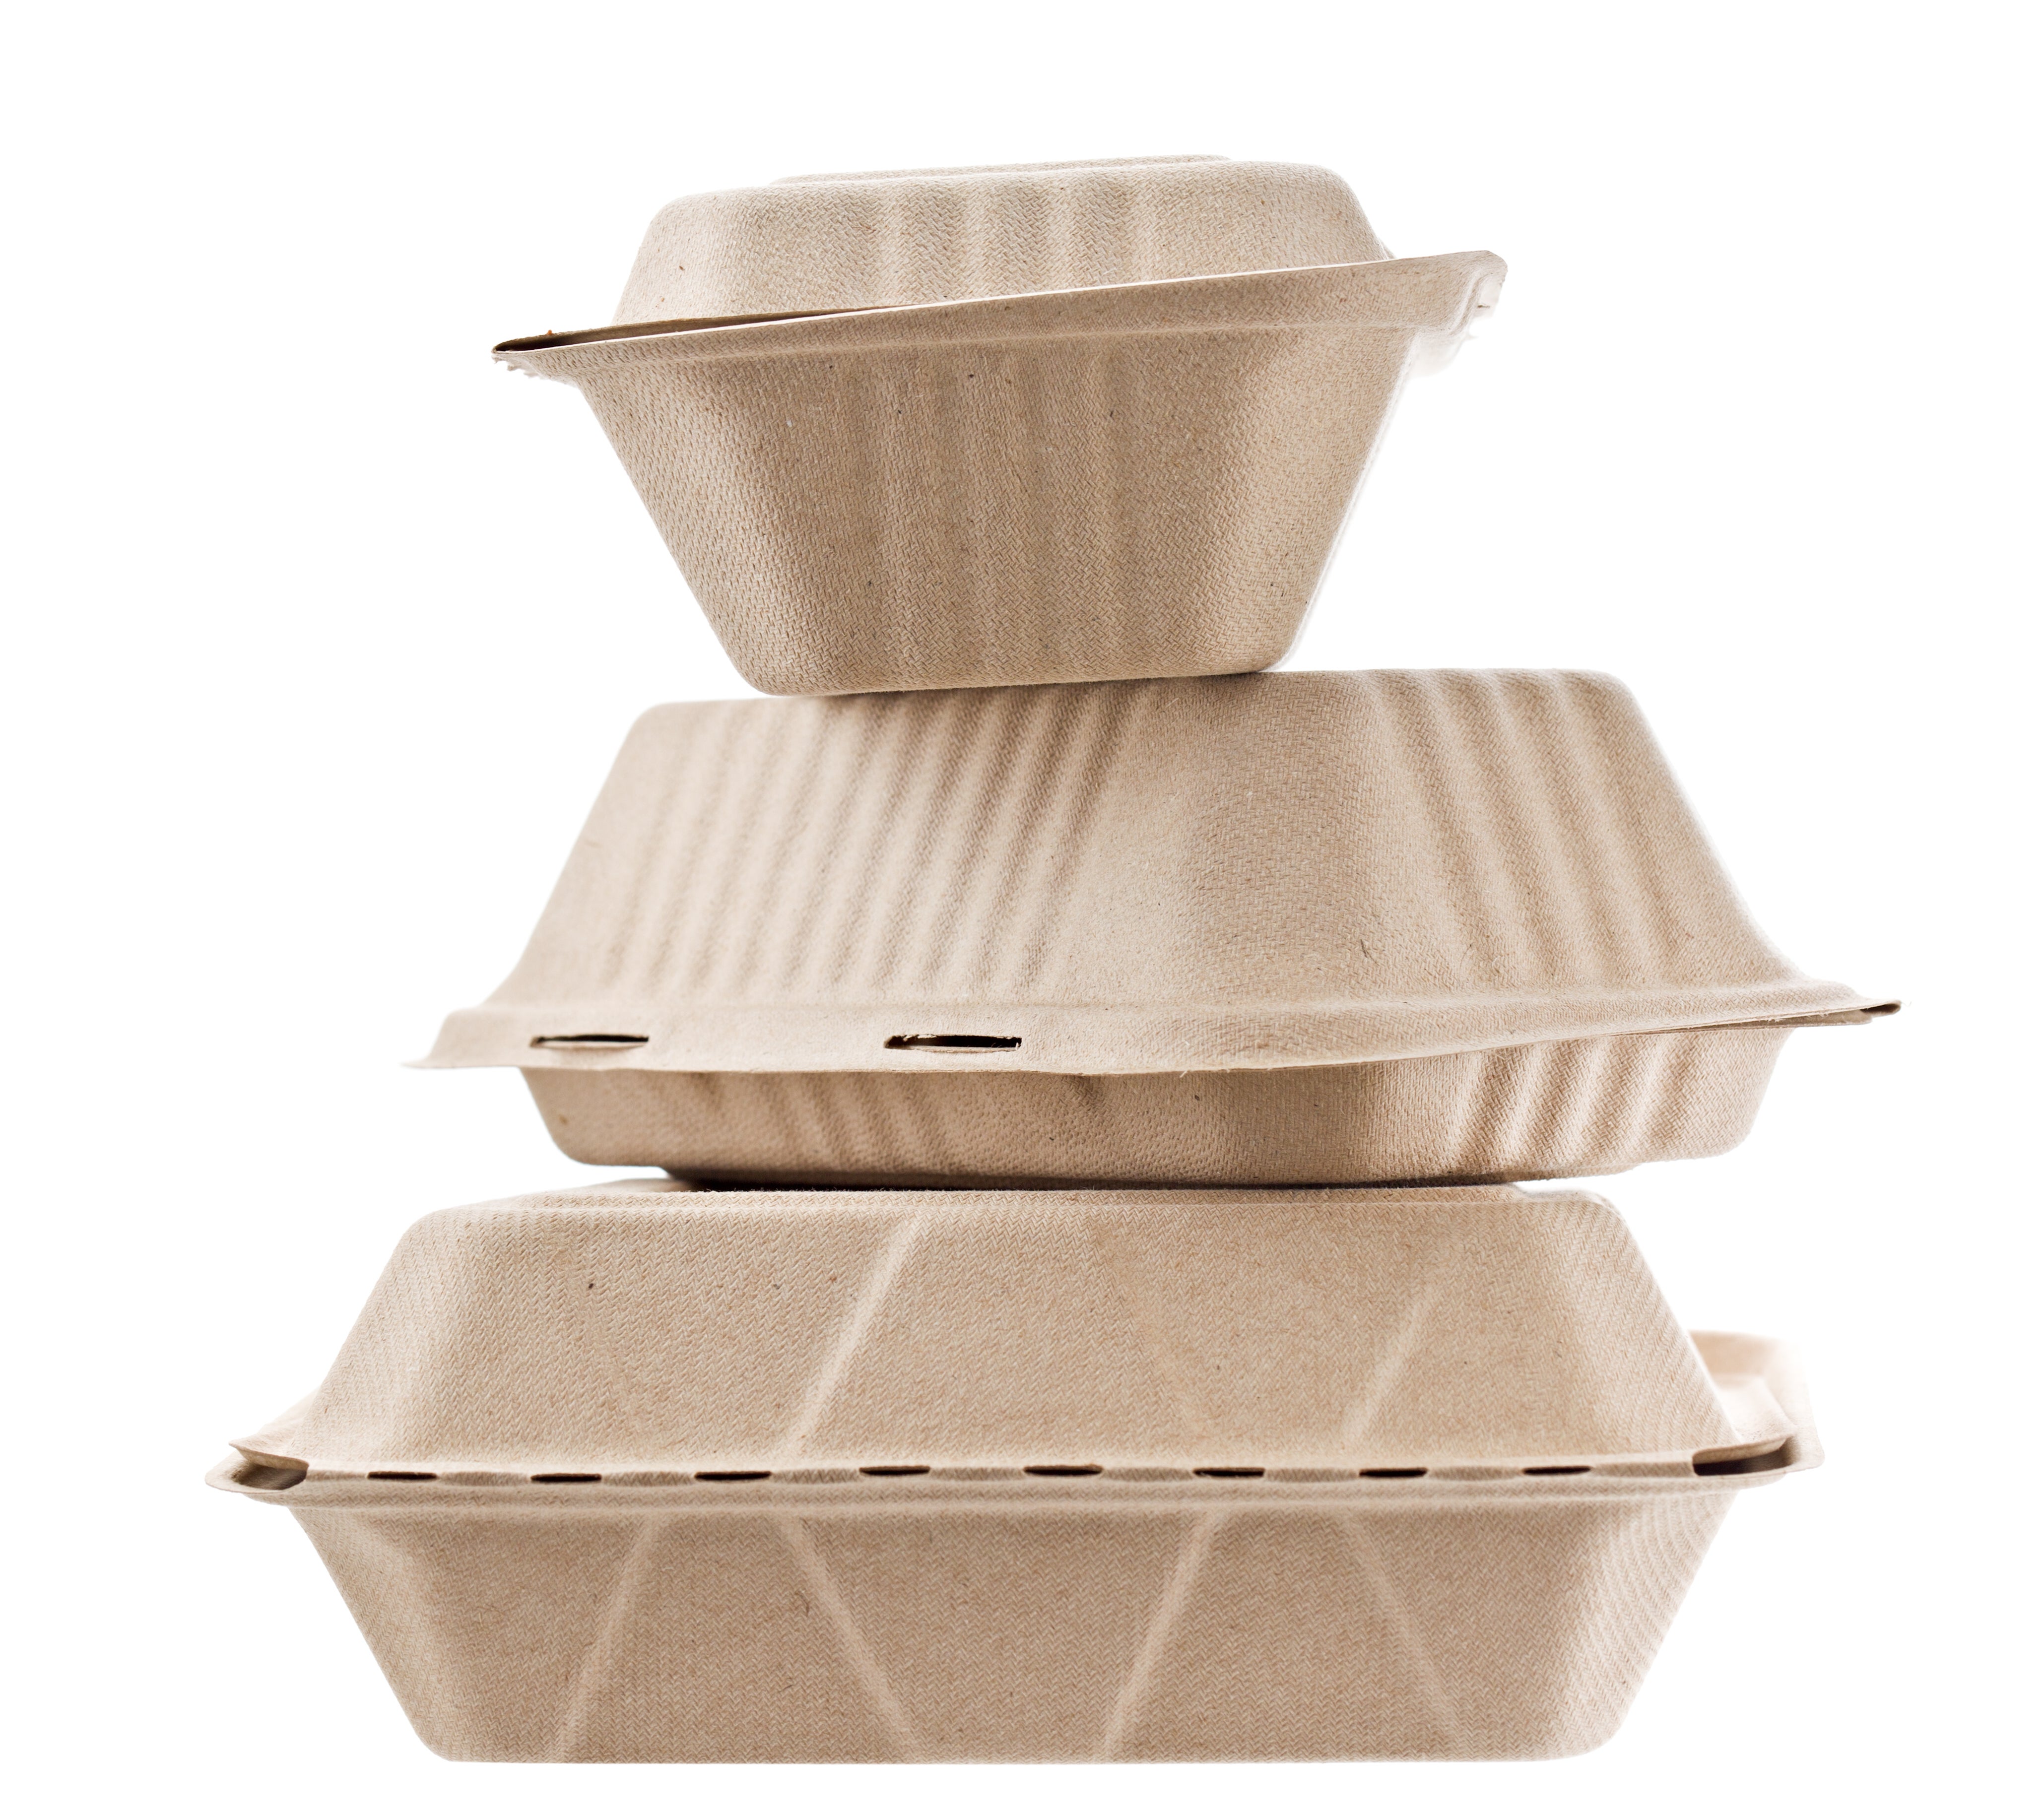 Food packaging containers.